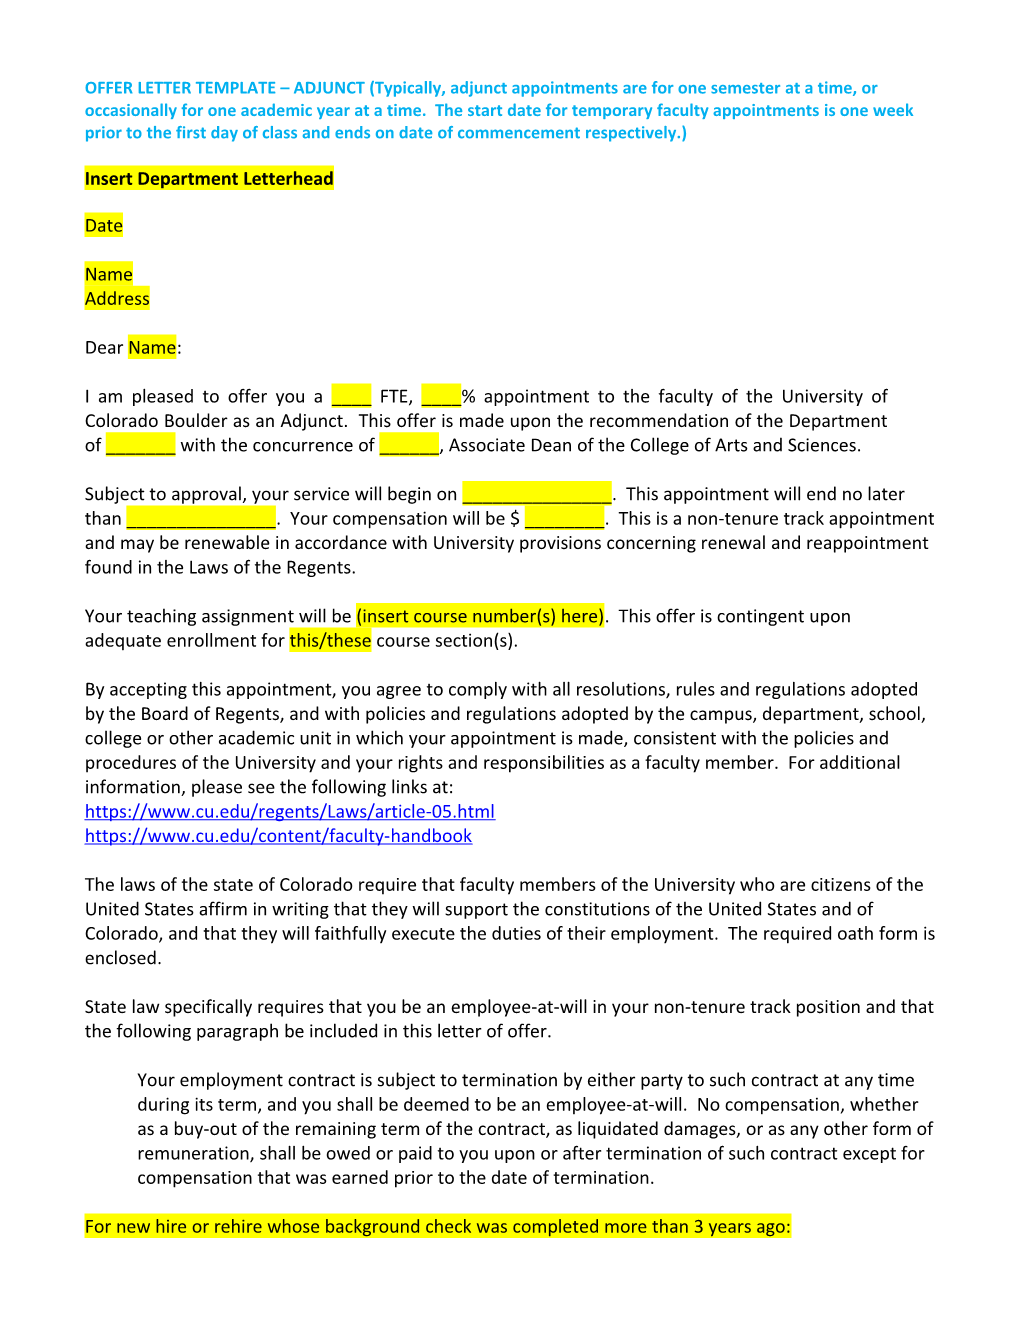 OFFER LETTER TEMPLATE ADJUNCT (Typically, Adjunct Appointments Are for One Semester At